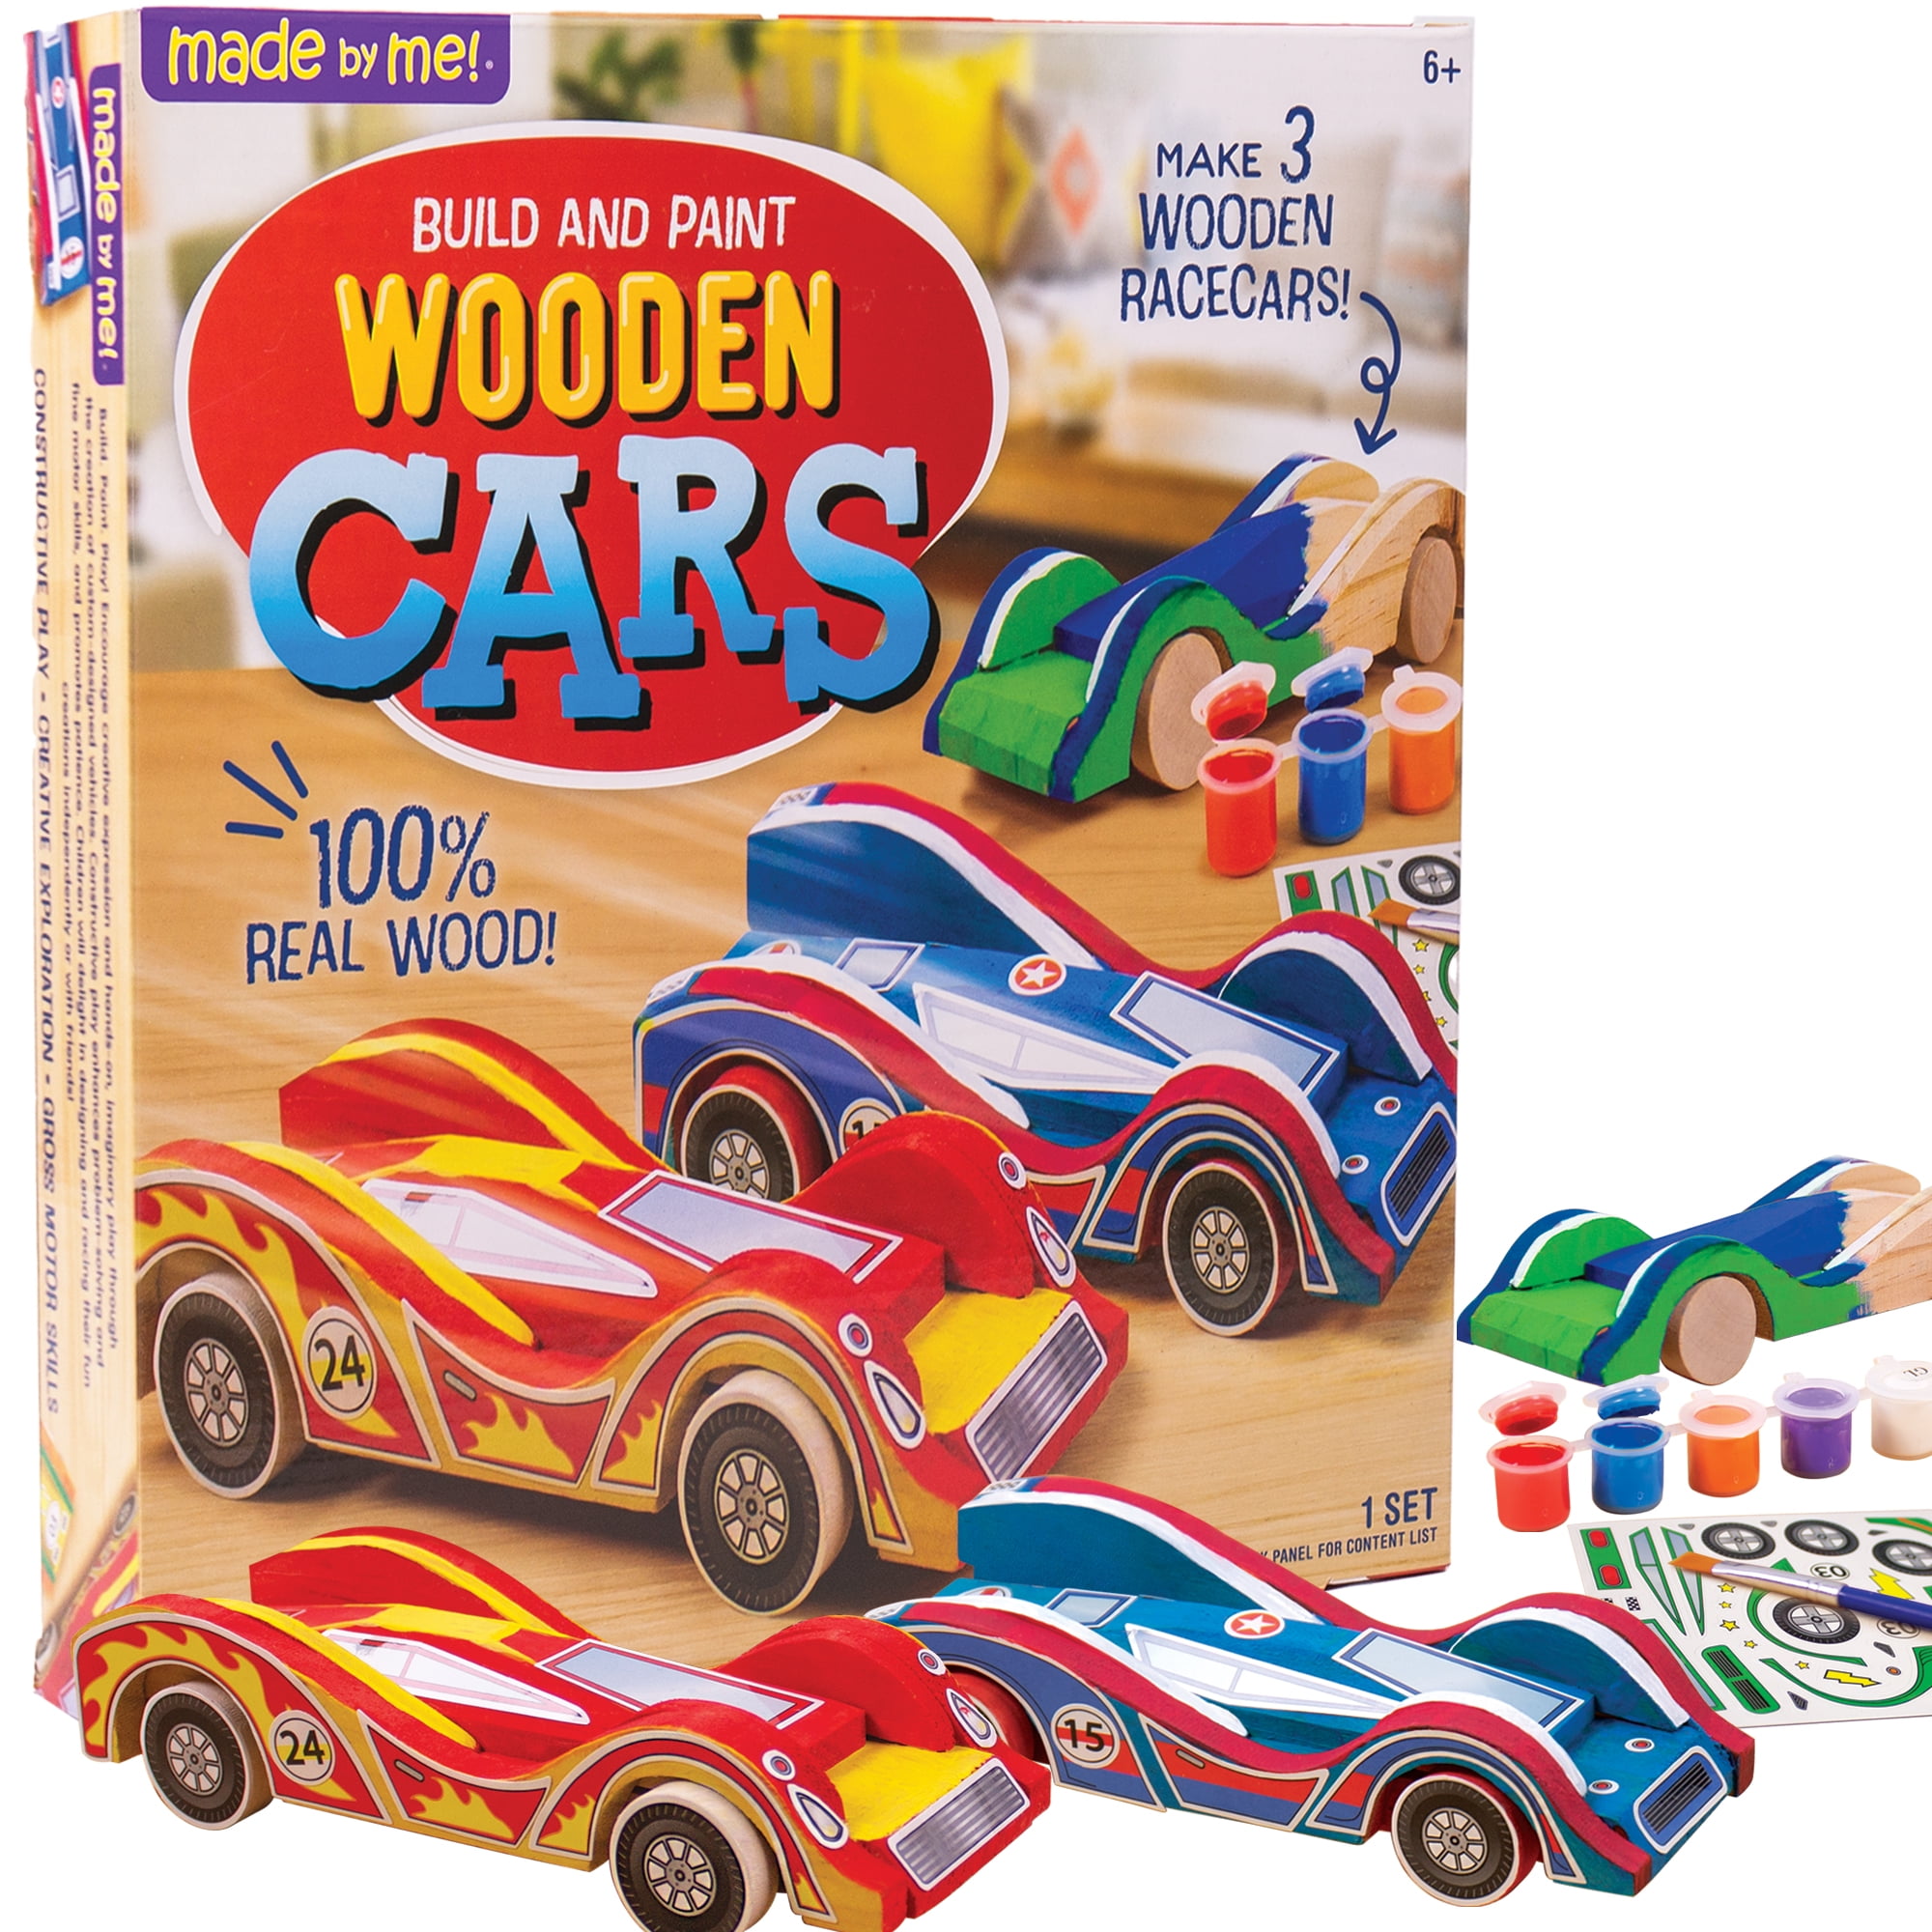 4 Mini Race Cars Plus 4 Pack Self-Inking Stampers BY THV Kids Fun Pack!